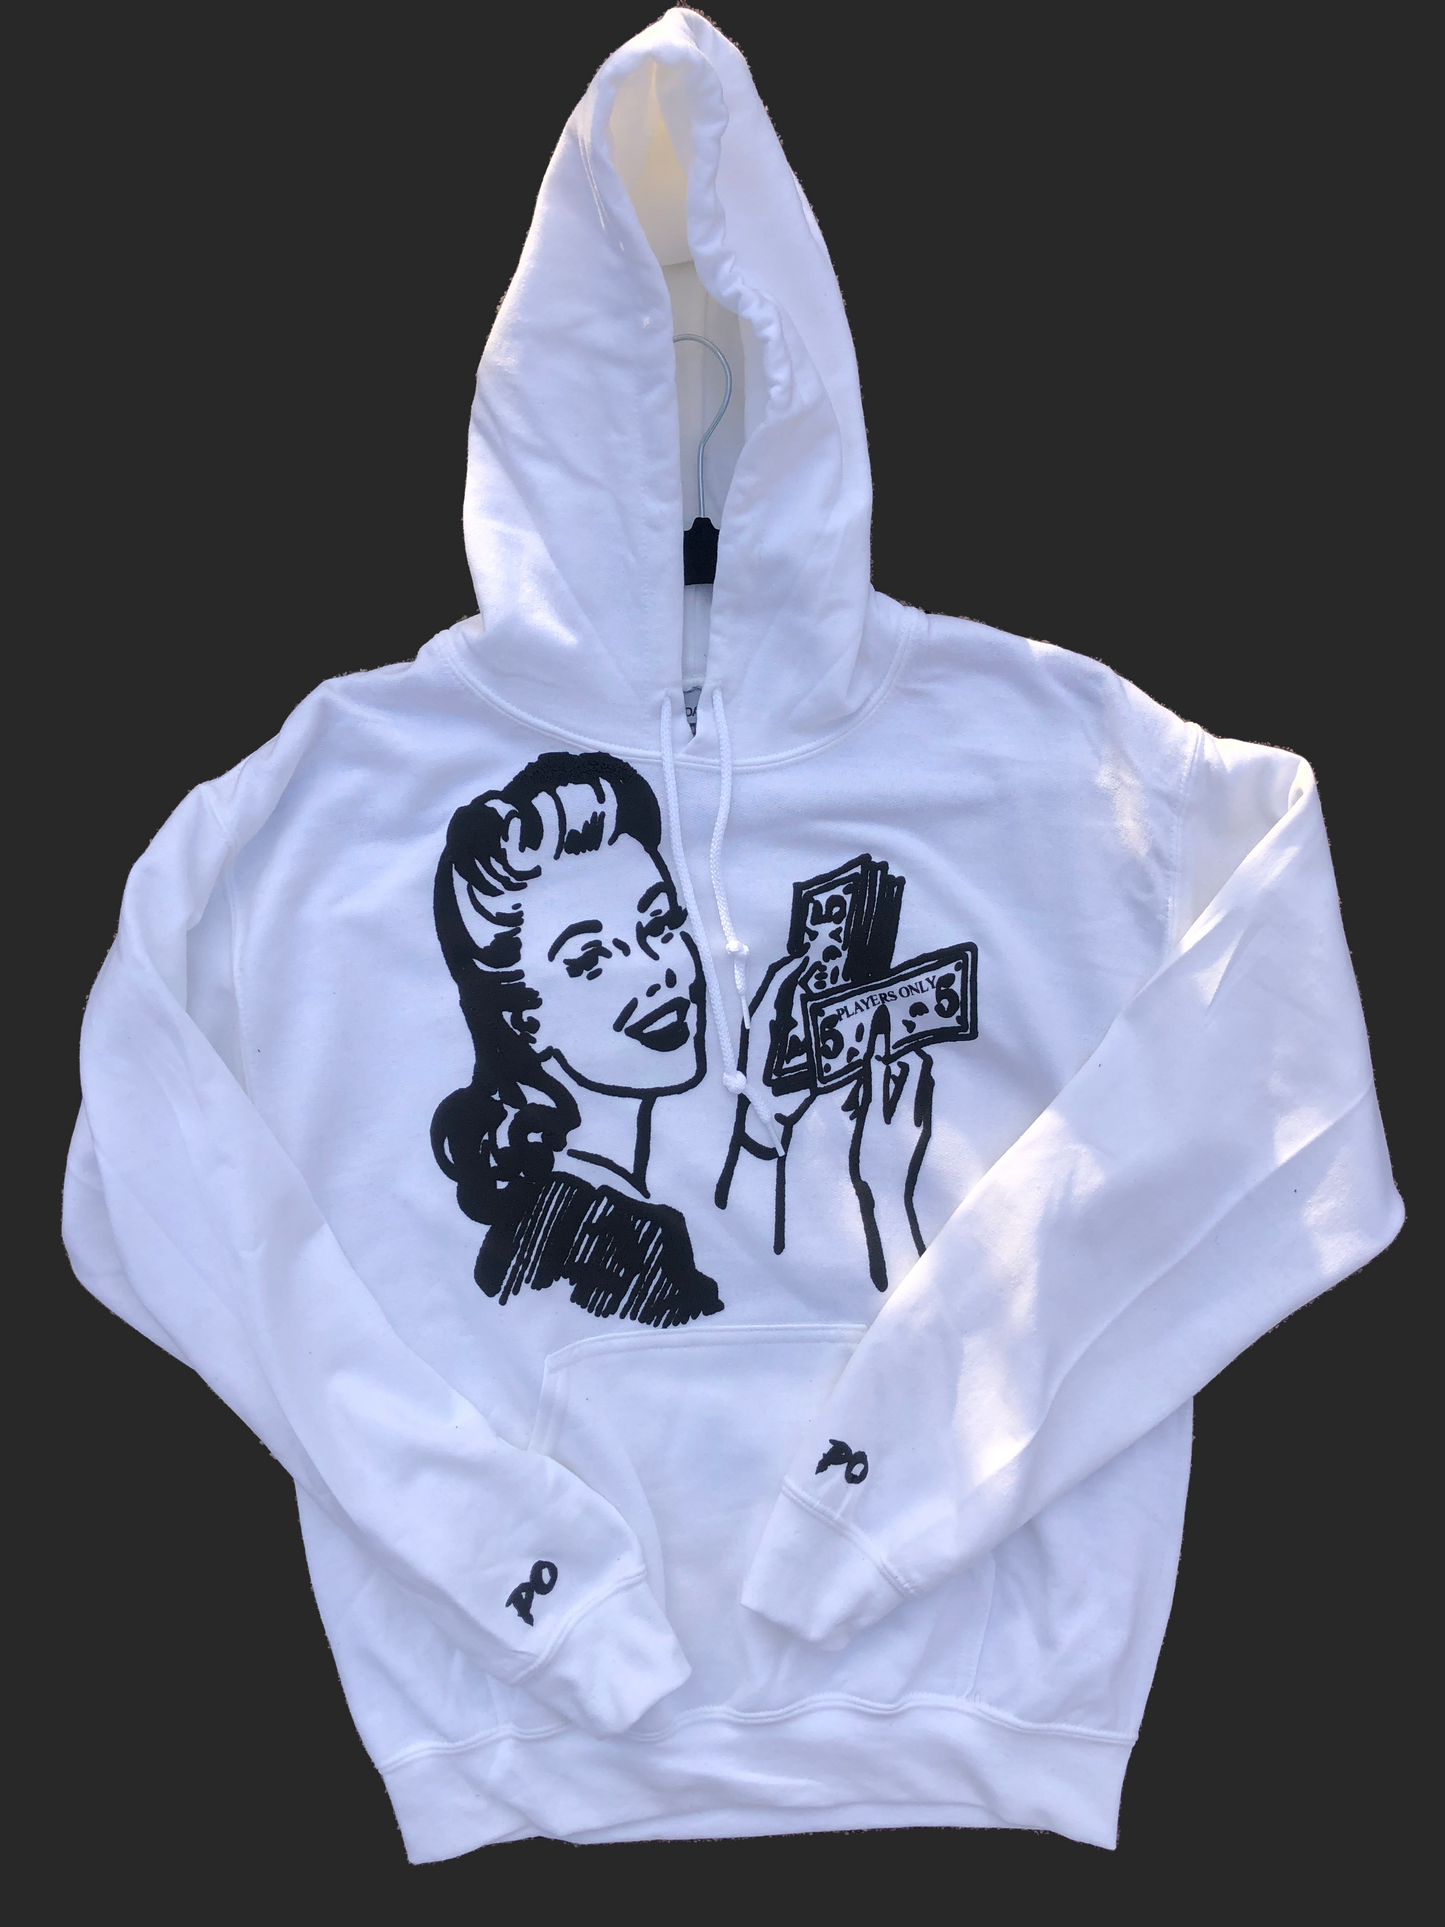 Players Only "Don't Check On Me, Cause the Check On Me" Hoodie